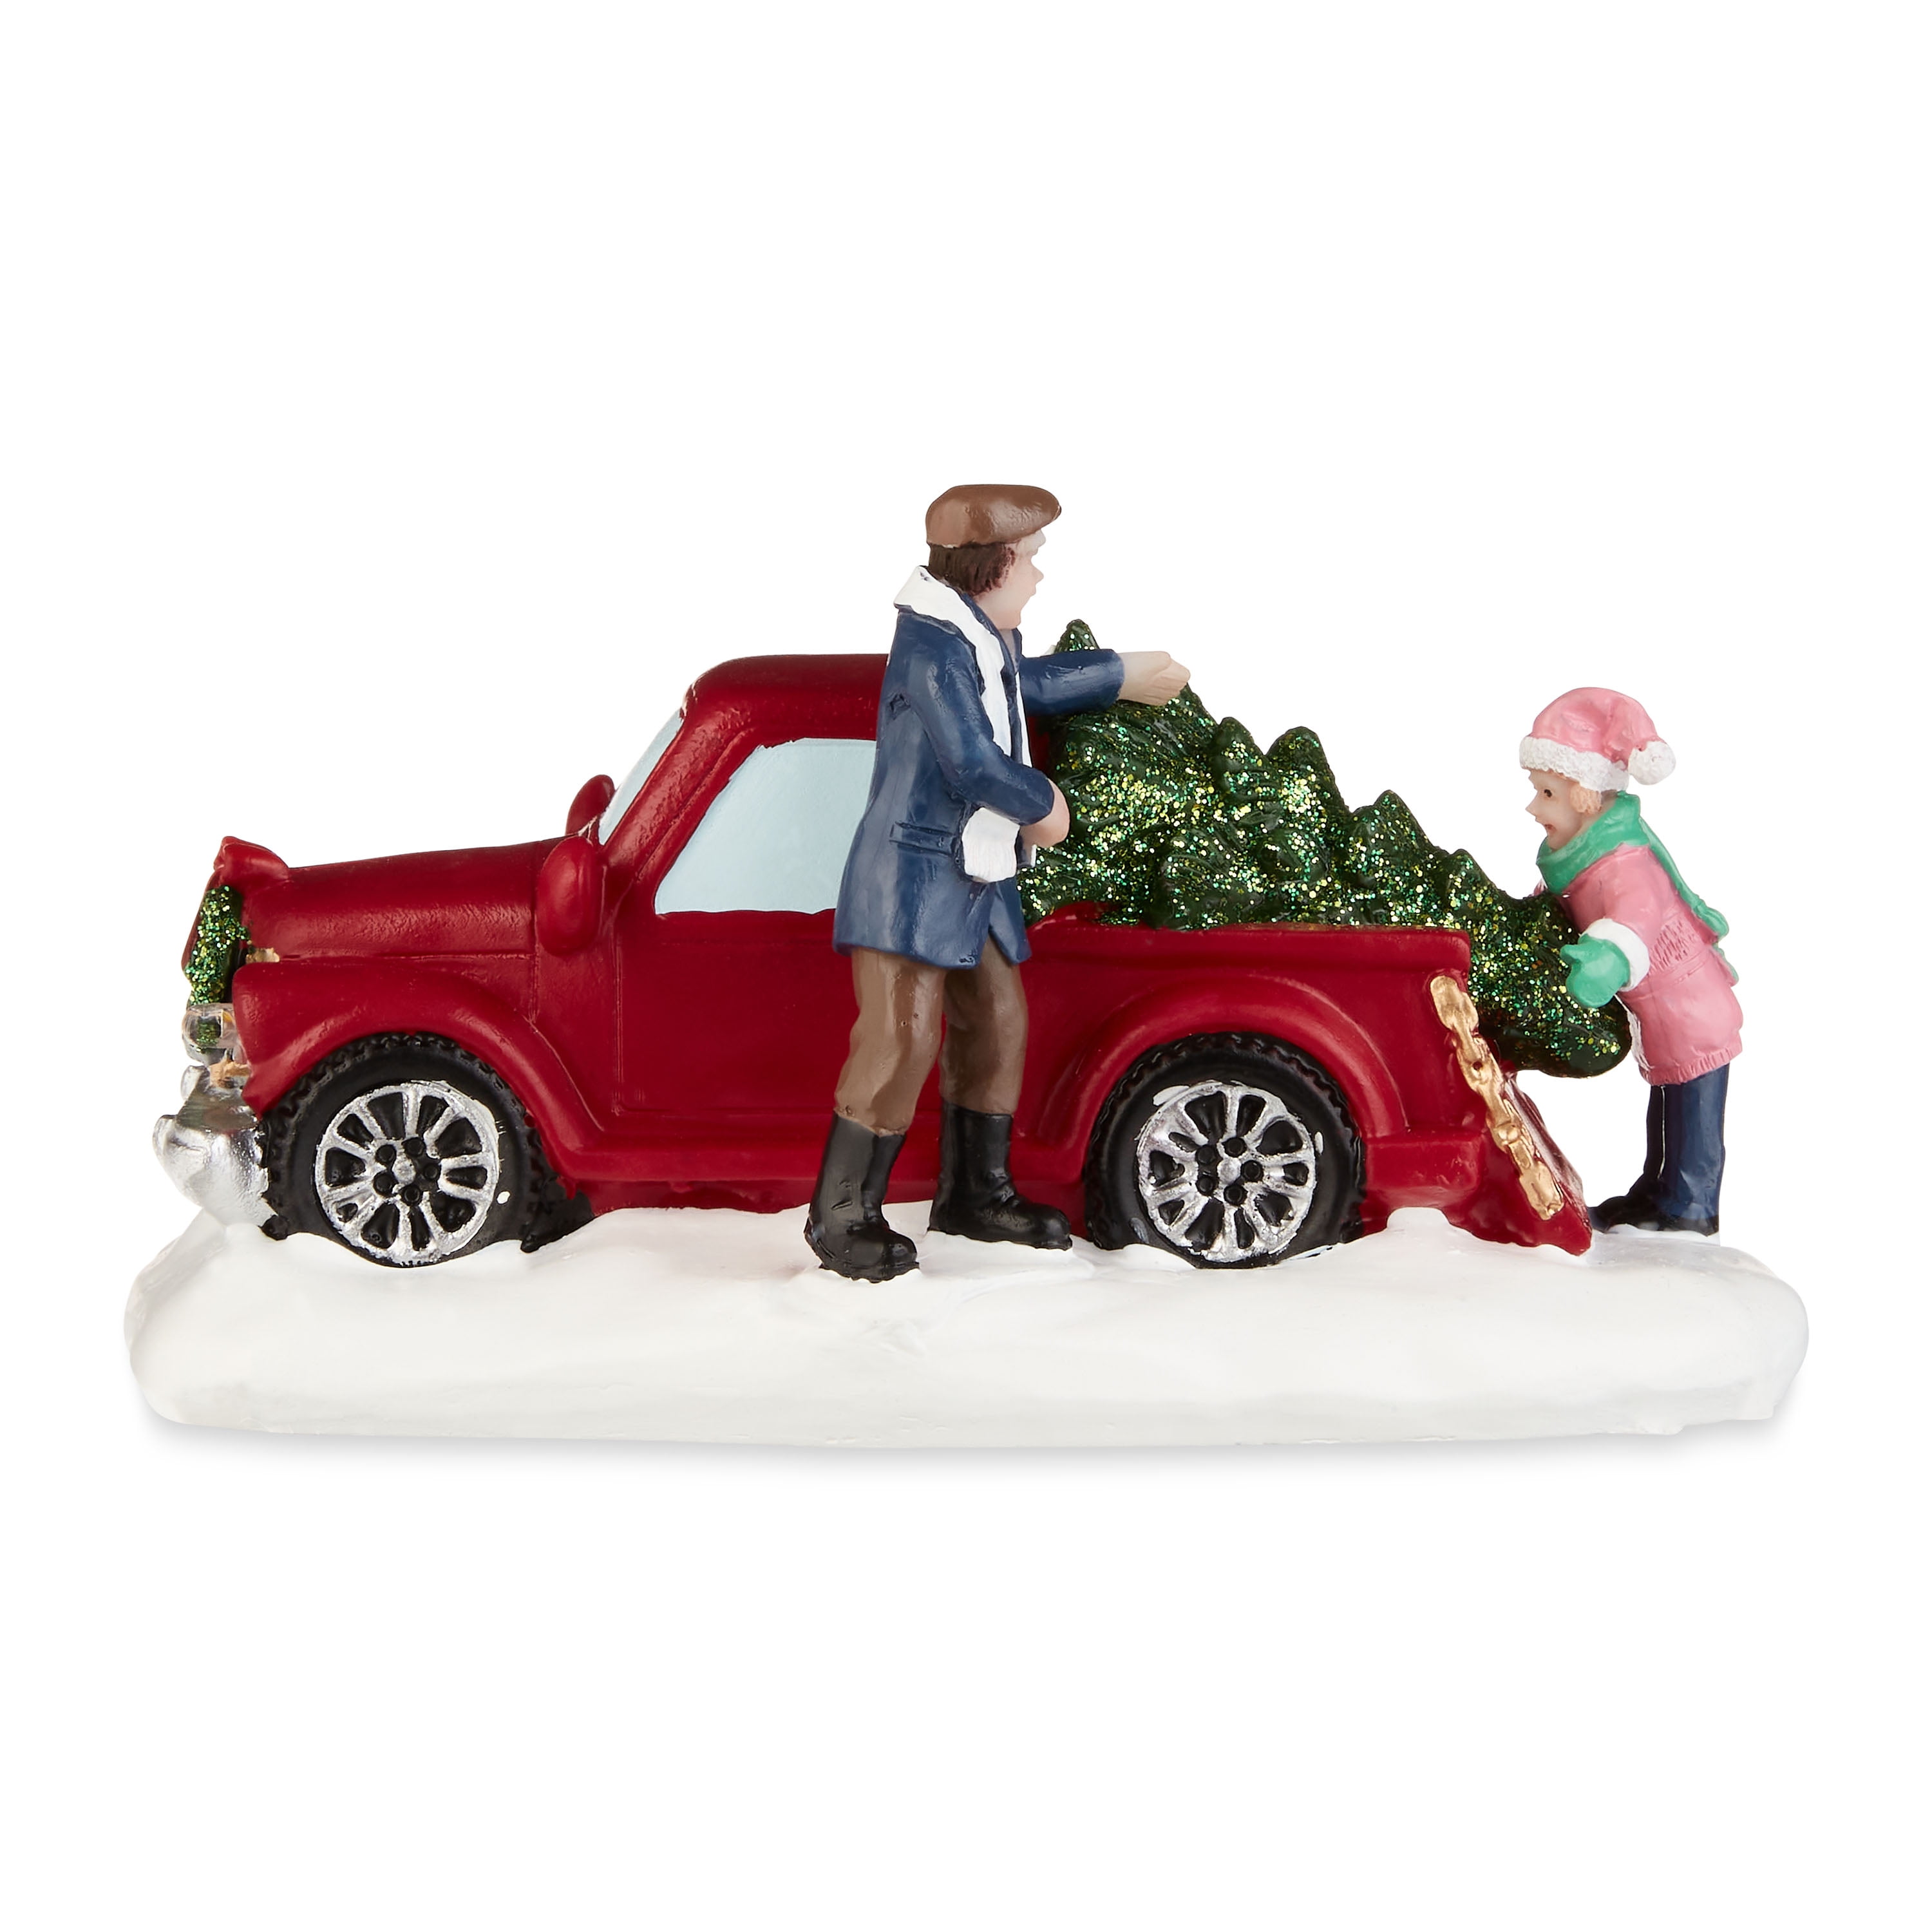 Holiday Time Christmas Village Accessory Indoor Decor LED Repair The Car, 2.625" Height